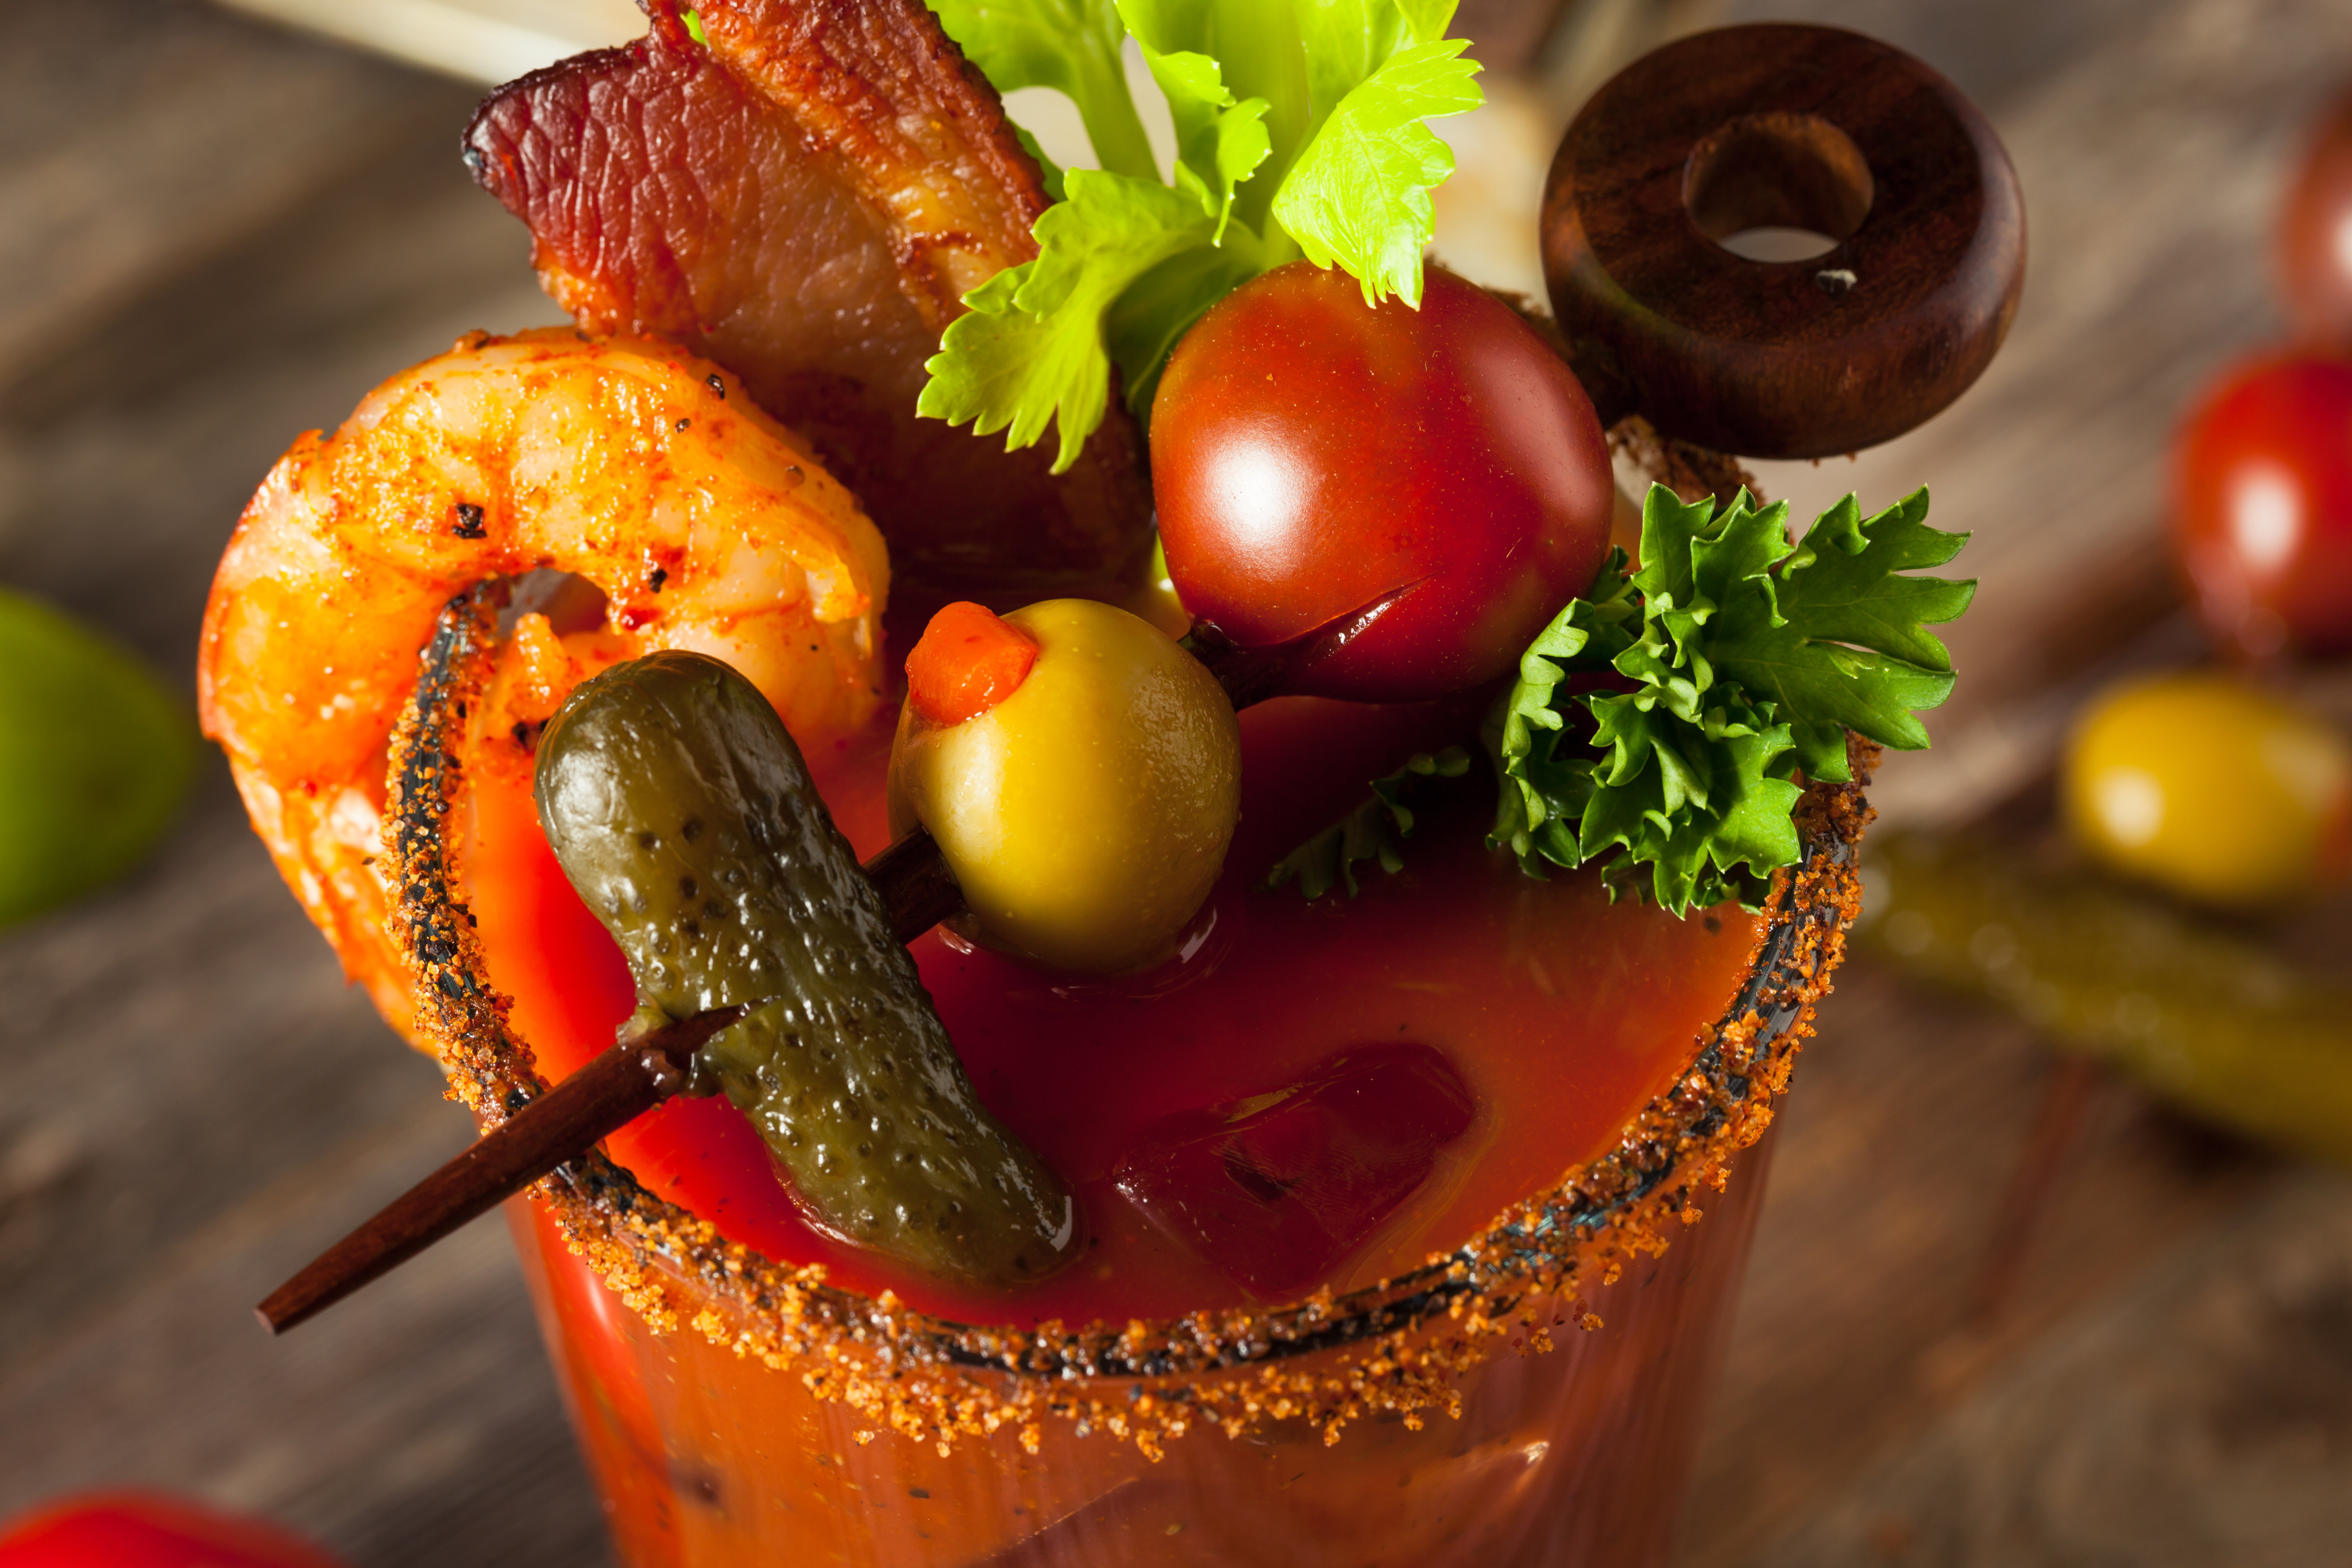 Drink trends for the coming year include more savoury cocktails, such as this bacon spicy Bloody Mary with shrimp, pickle and olive, classic cocktails, and grower champagnes. Falling out of favour, we hope, will be cristalinos – clarified aged tequilas – and so-called healthy spirits. Photo: Shutterstock